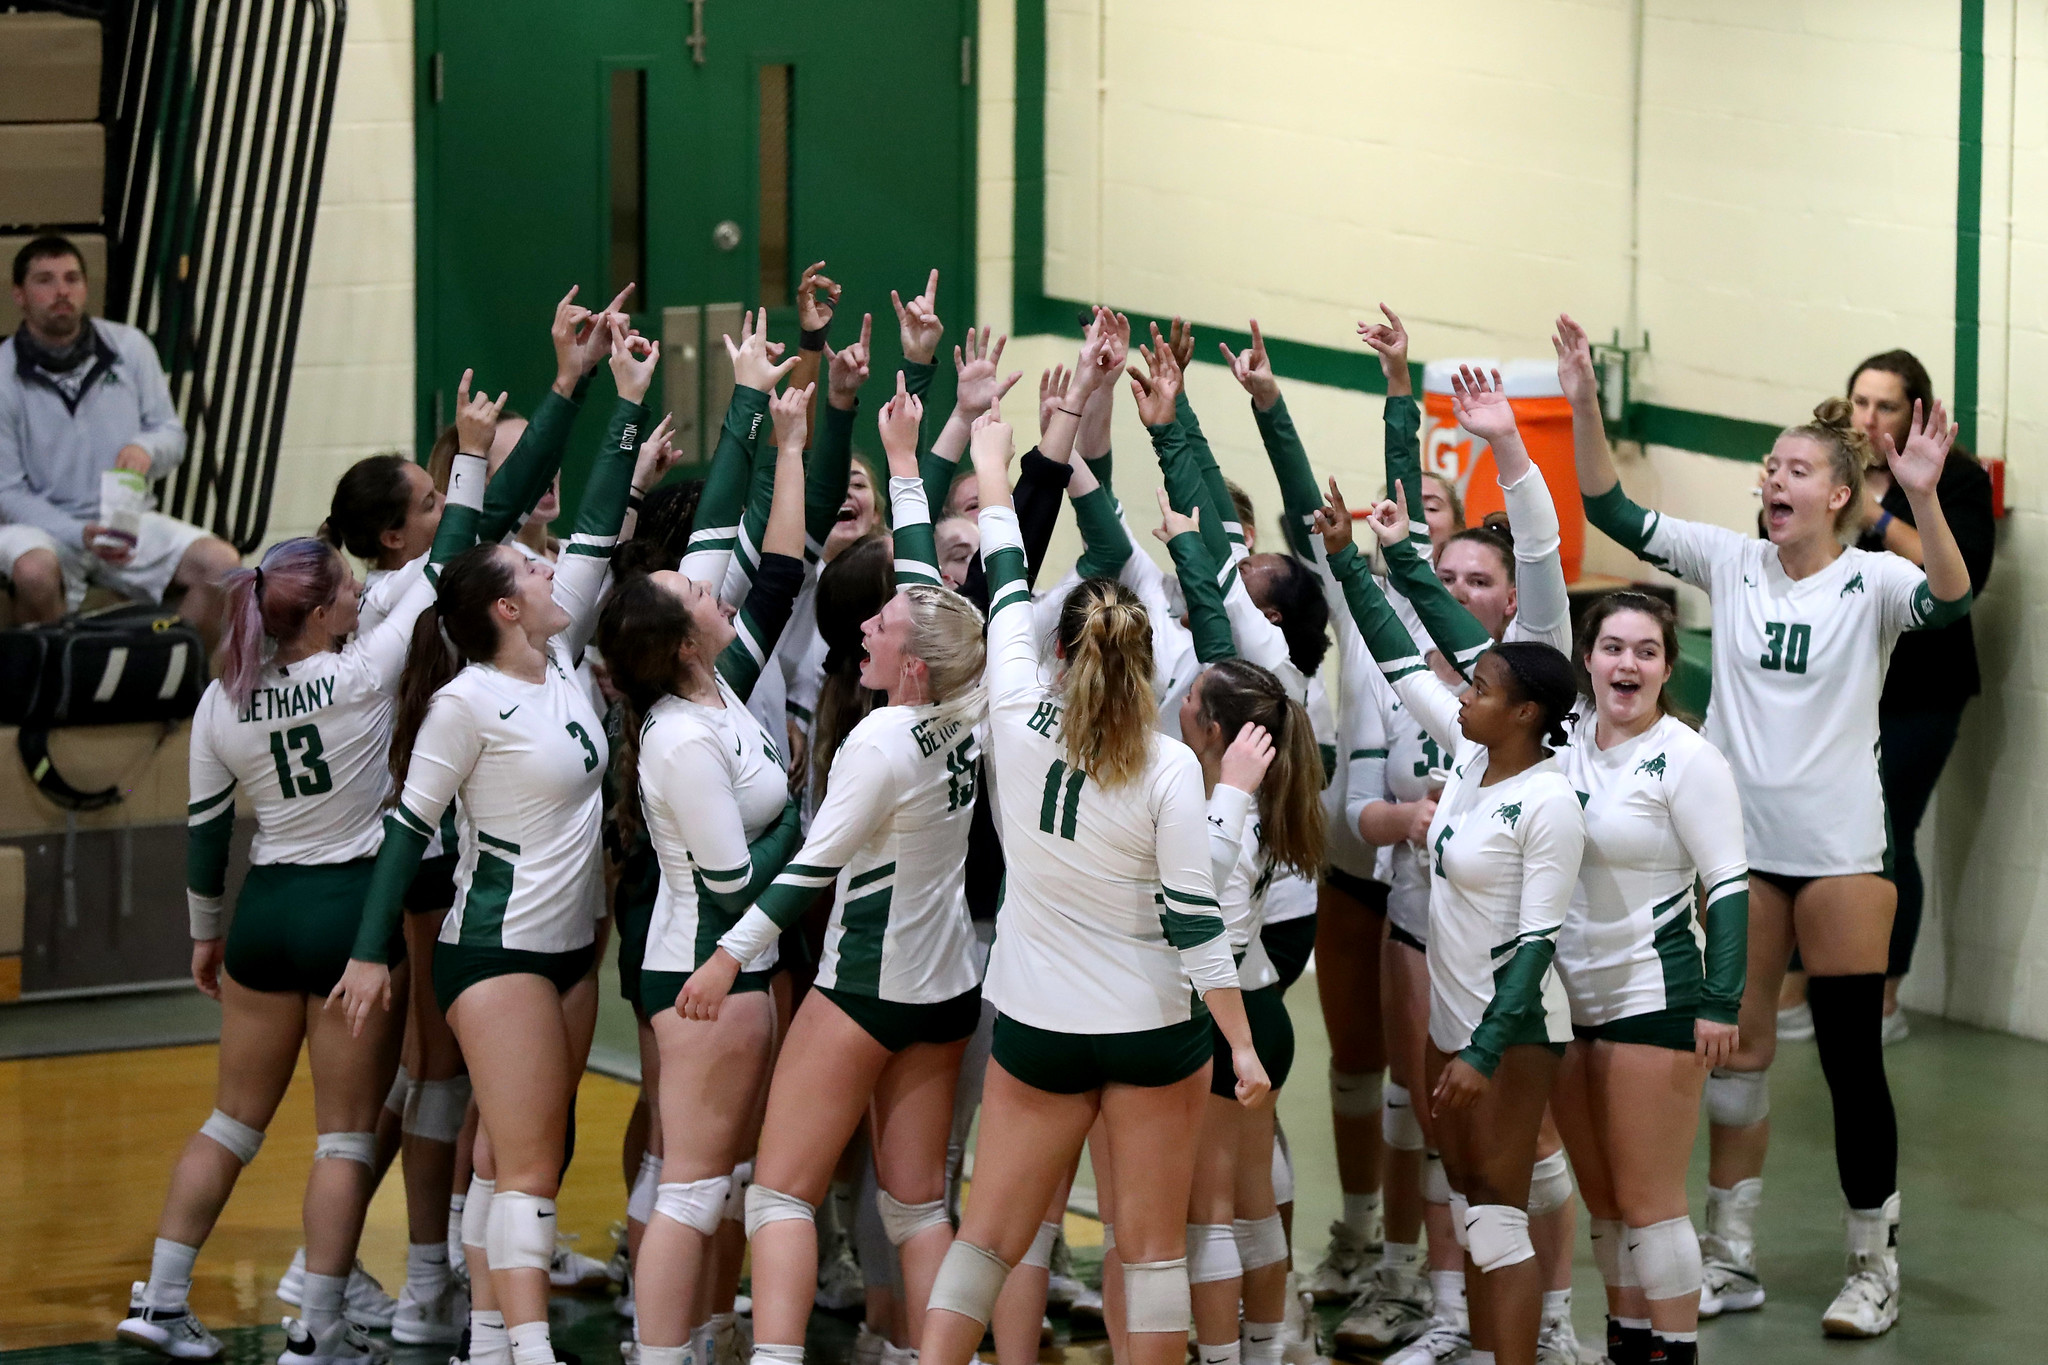 Bethany favored in PAC women's volleyball preseason coaches' poll